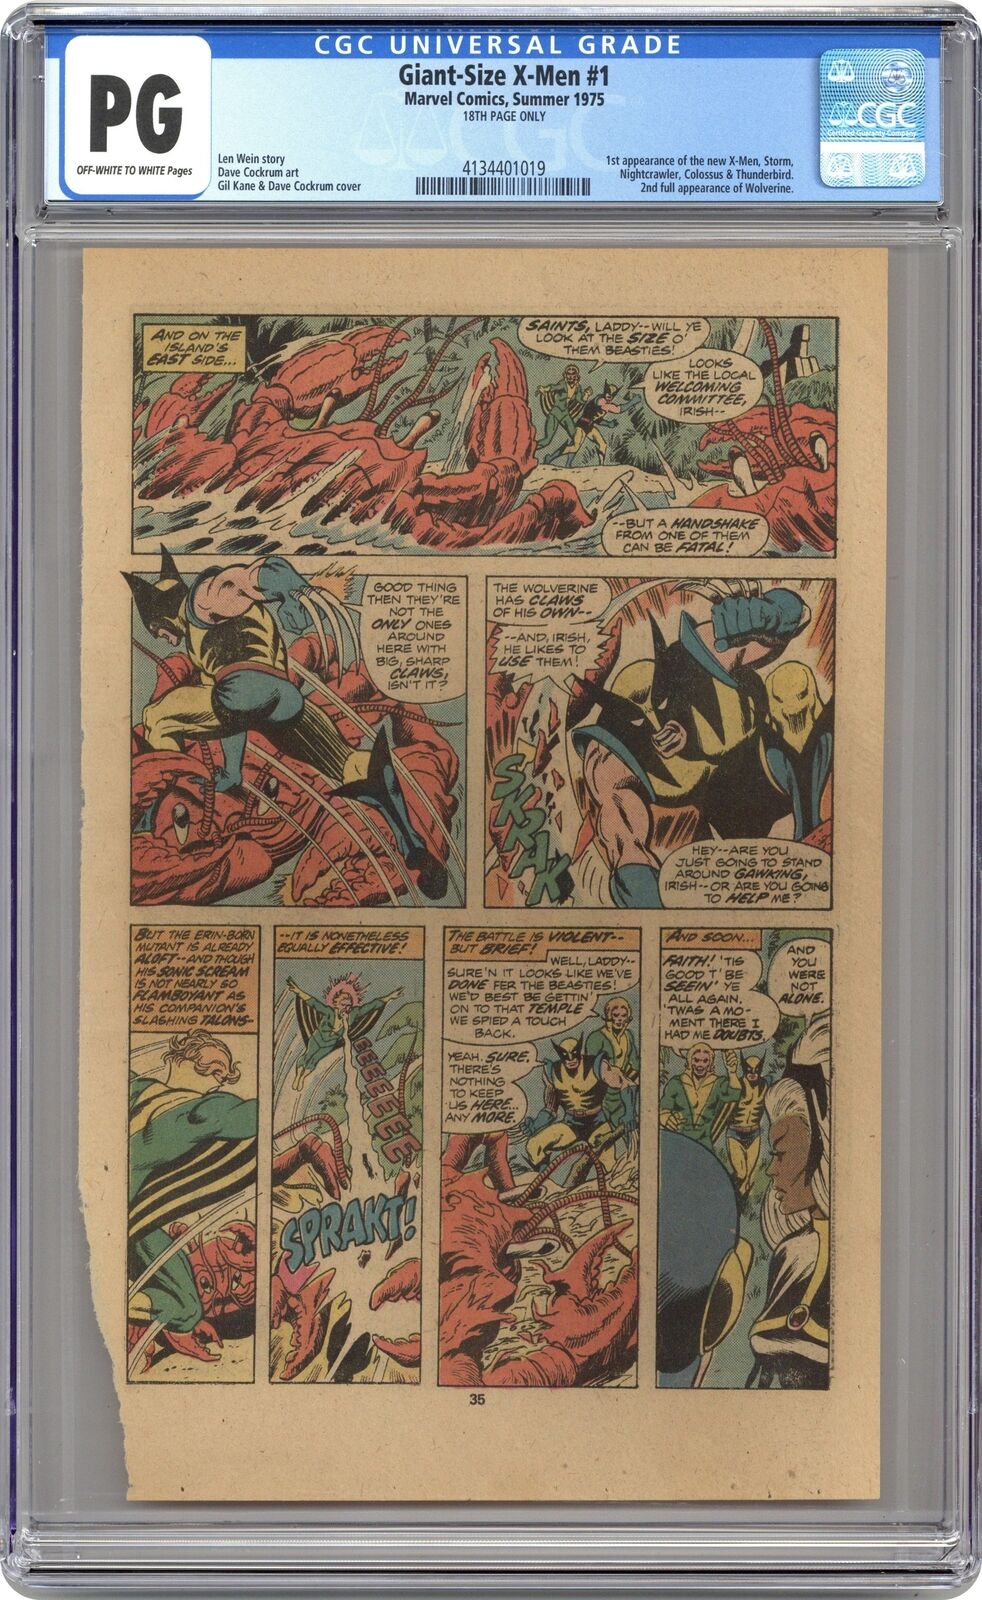 Giant Size X-Men (1975) 1 CGC PG 18th Page Only 4134401019 1st Nightcrawler